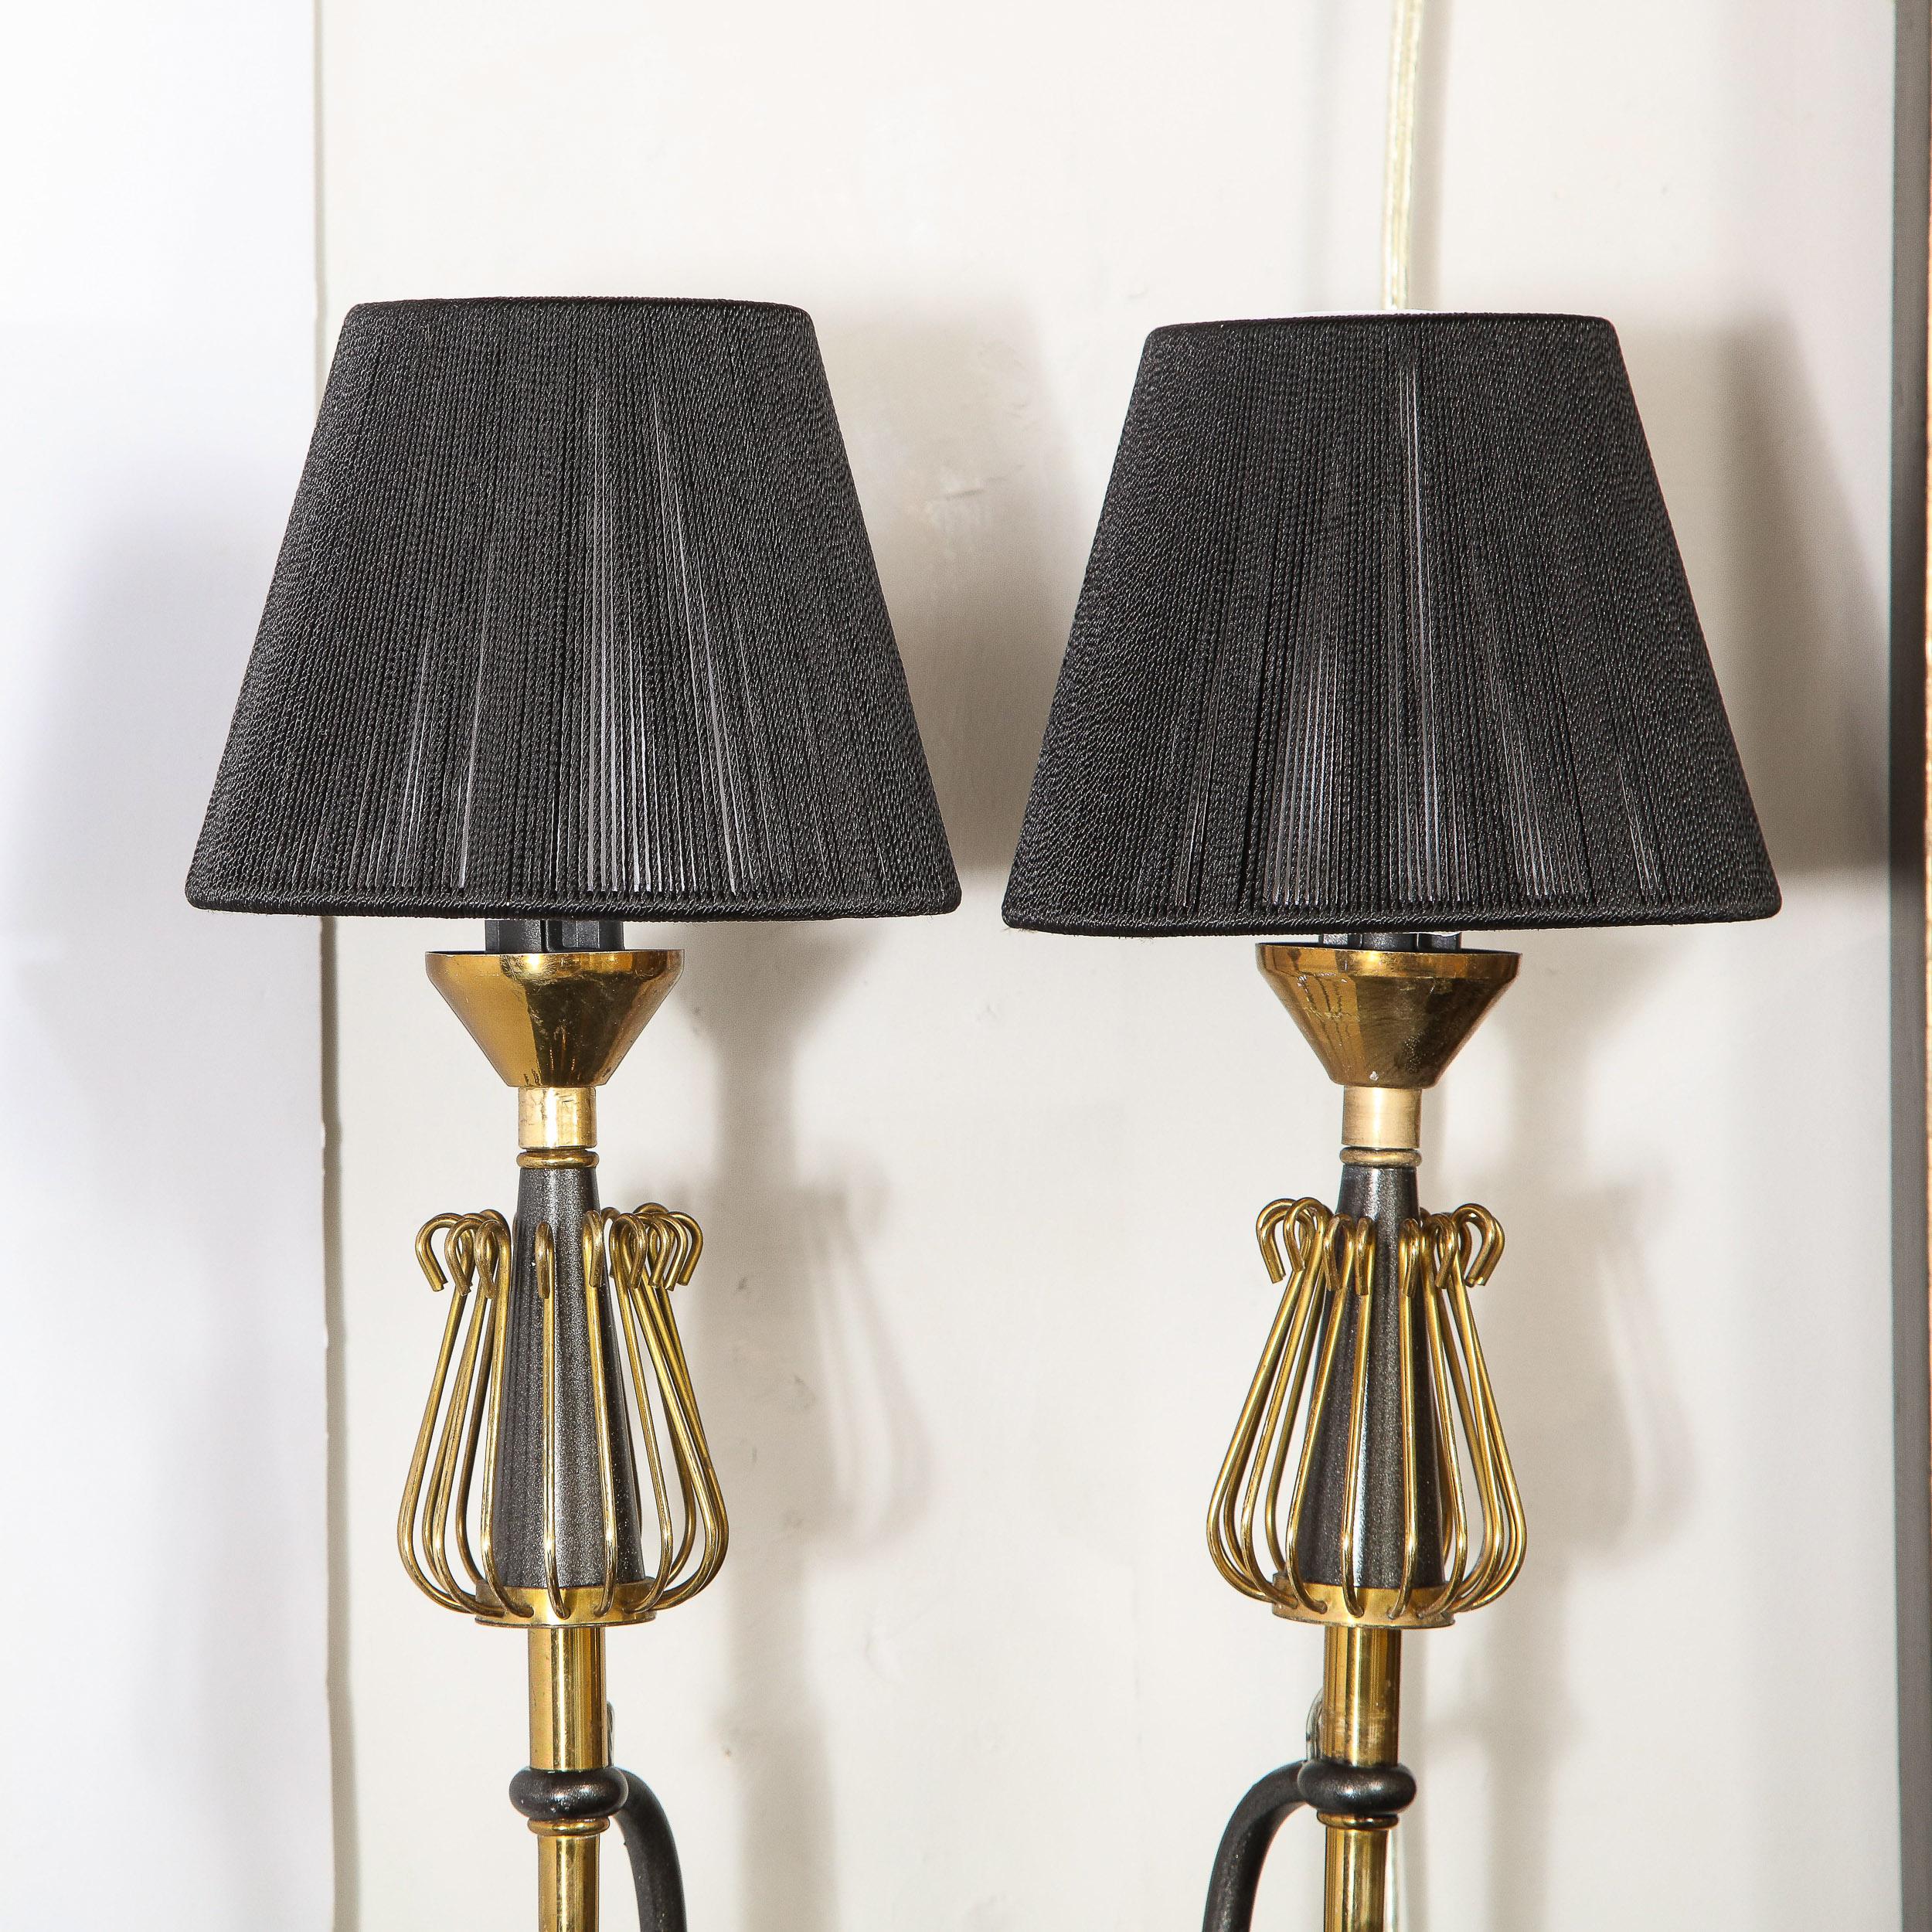 Mid-20th Century Pair of Mid-Century Modern Brass & Black Enamel Sconces w/ Curvilinear Detailing For Sale